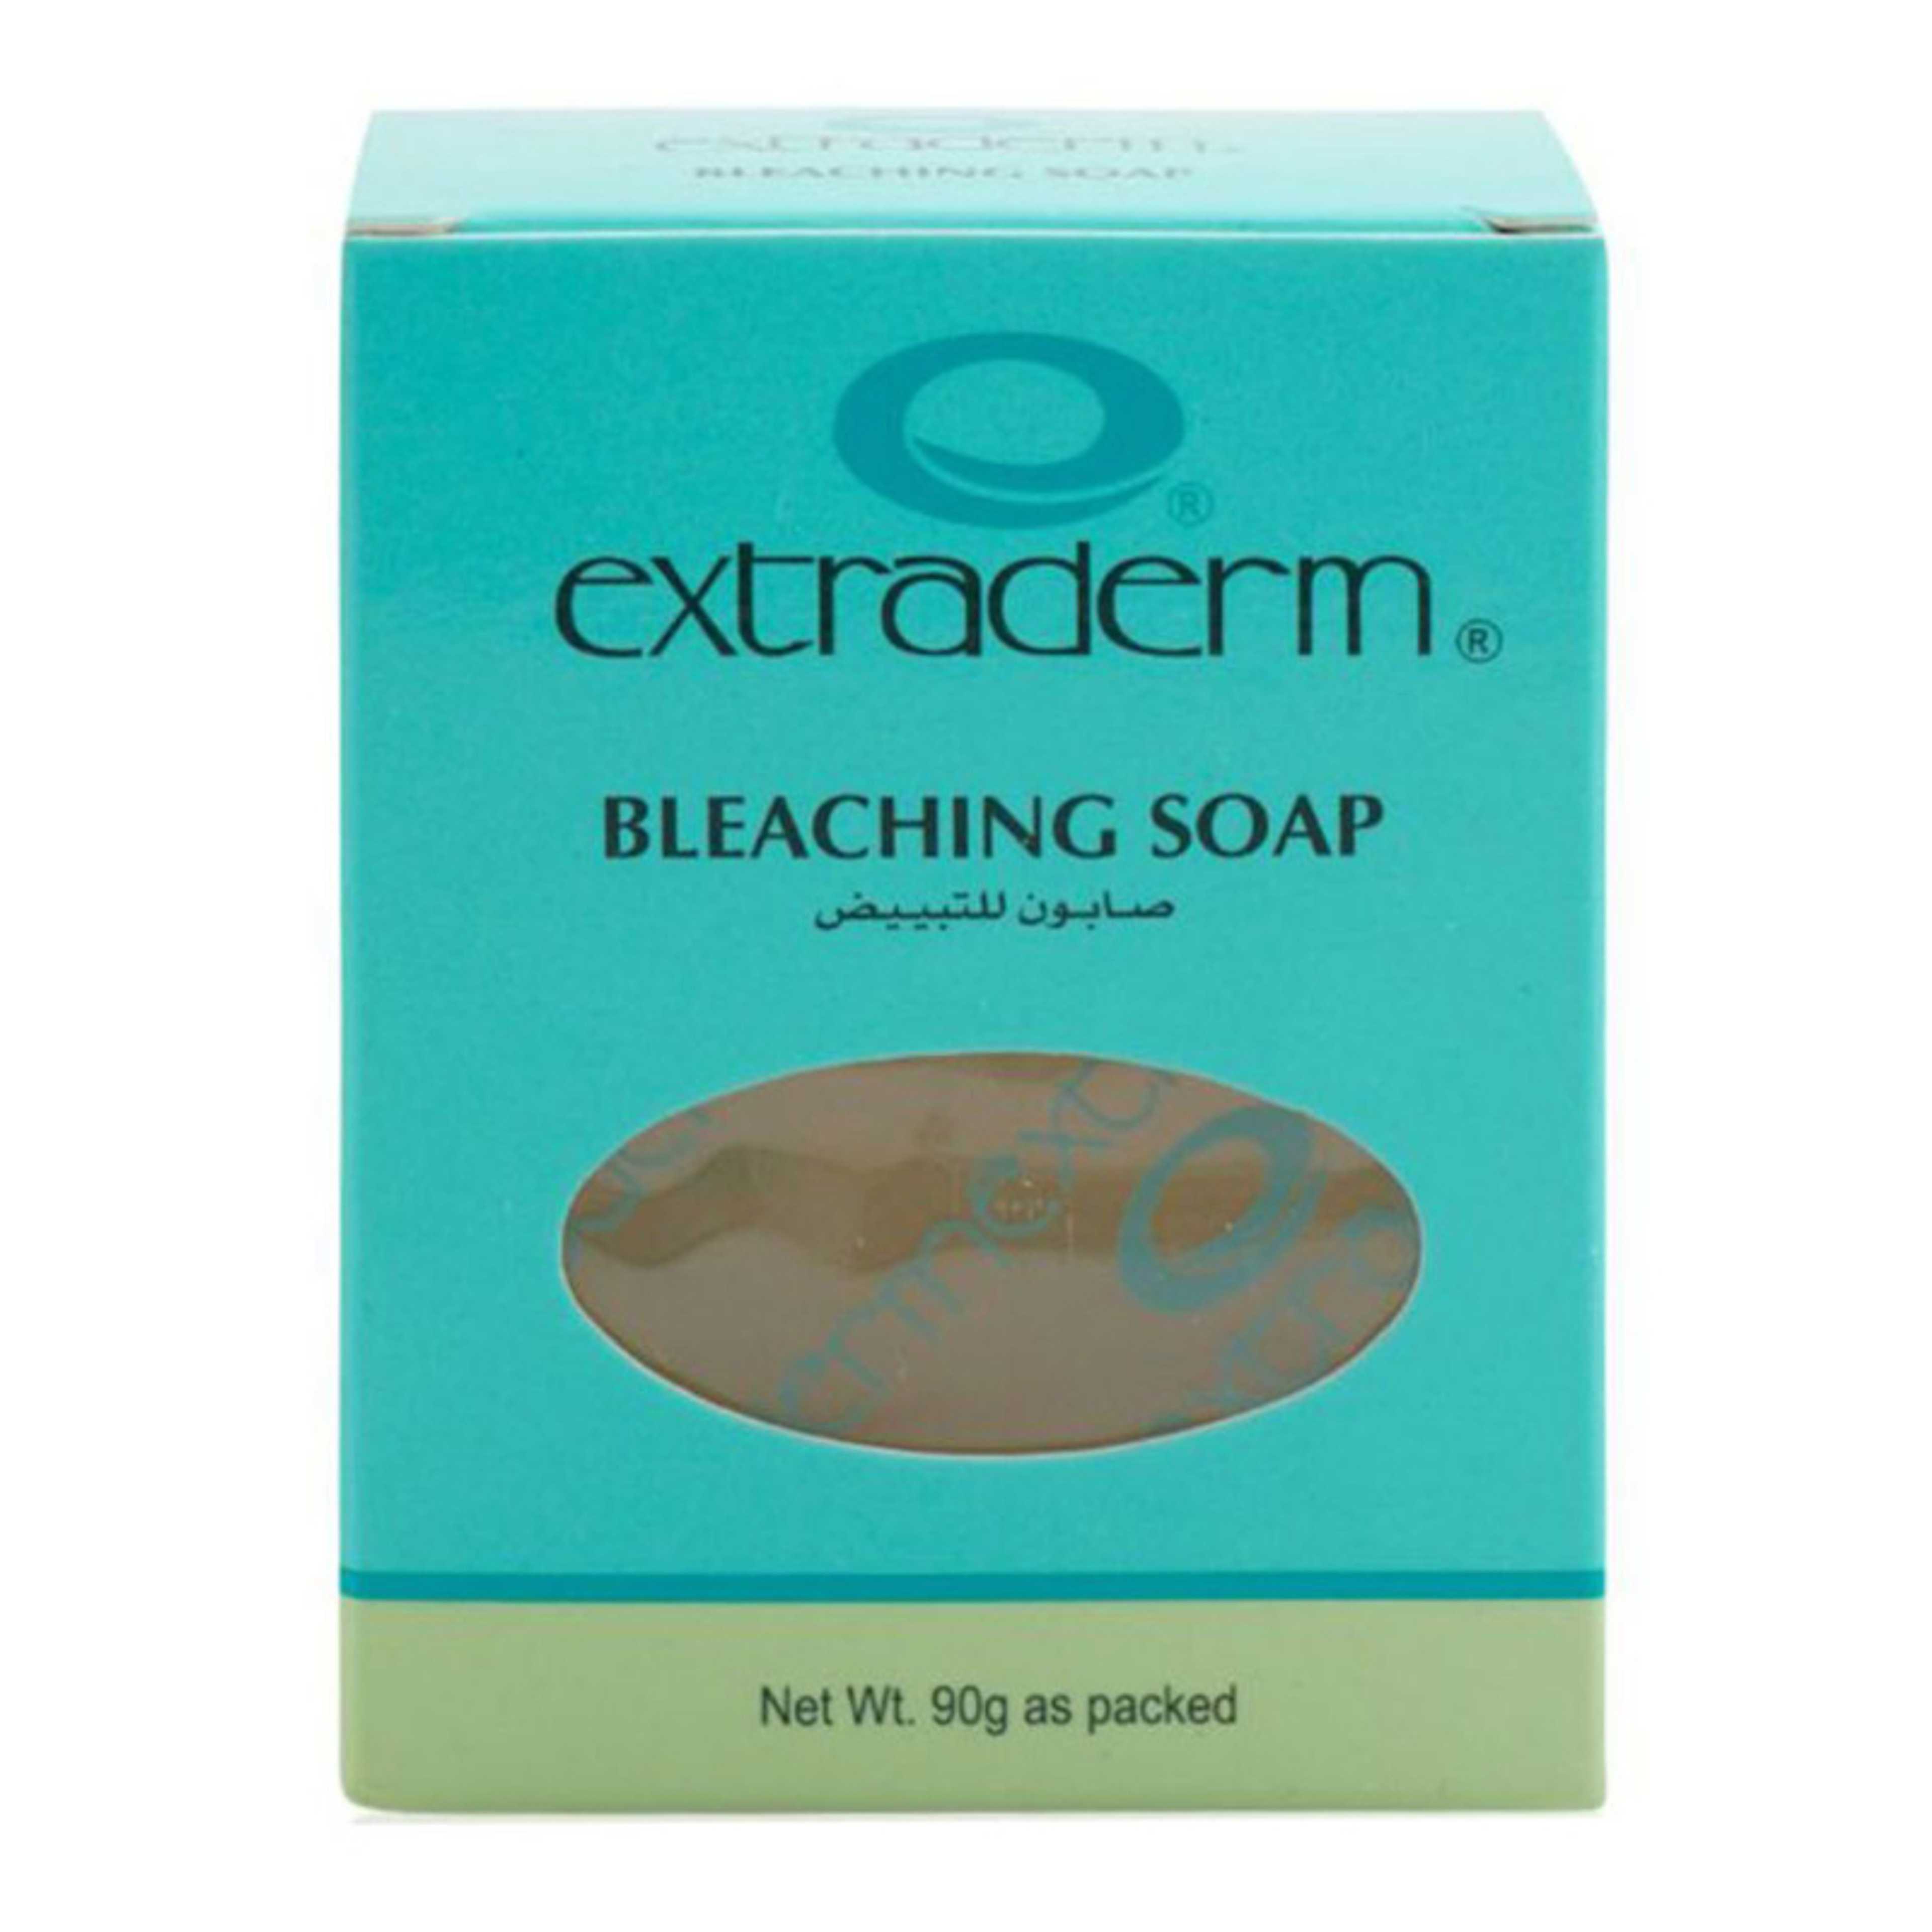 EXTRADERM_BLEACHING SOAP 90G (Imported)